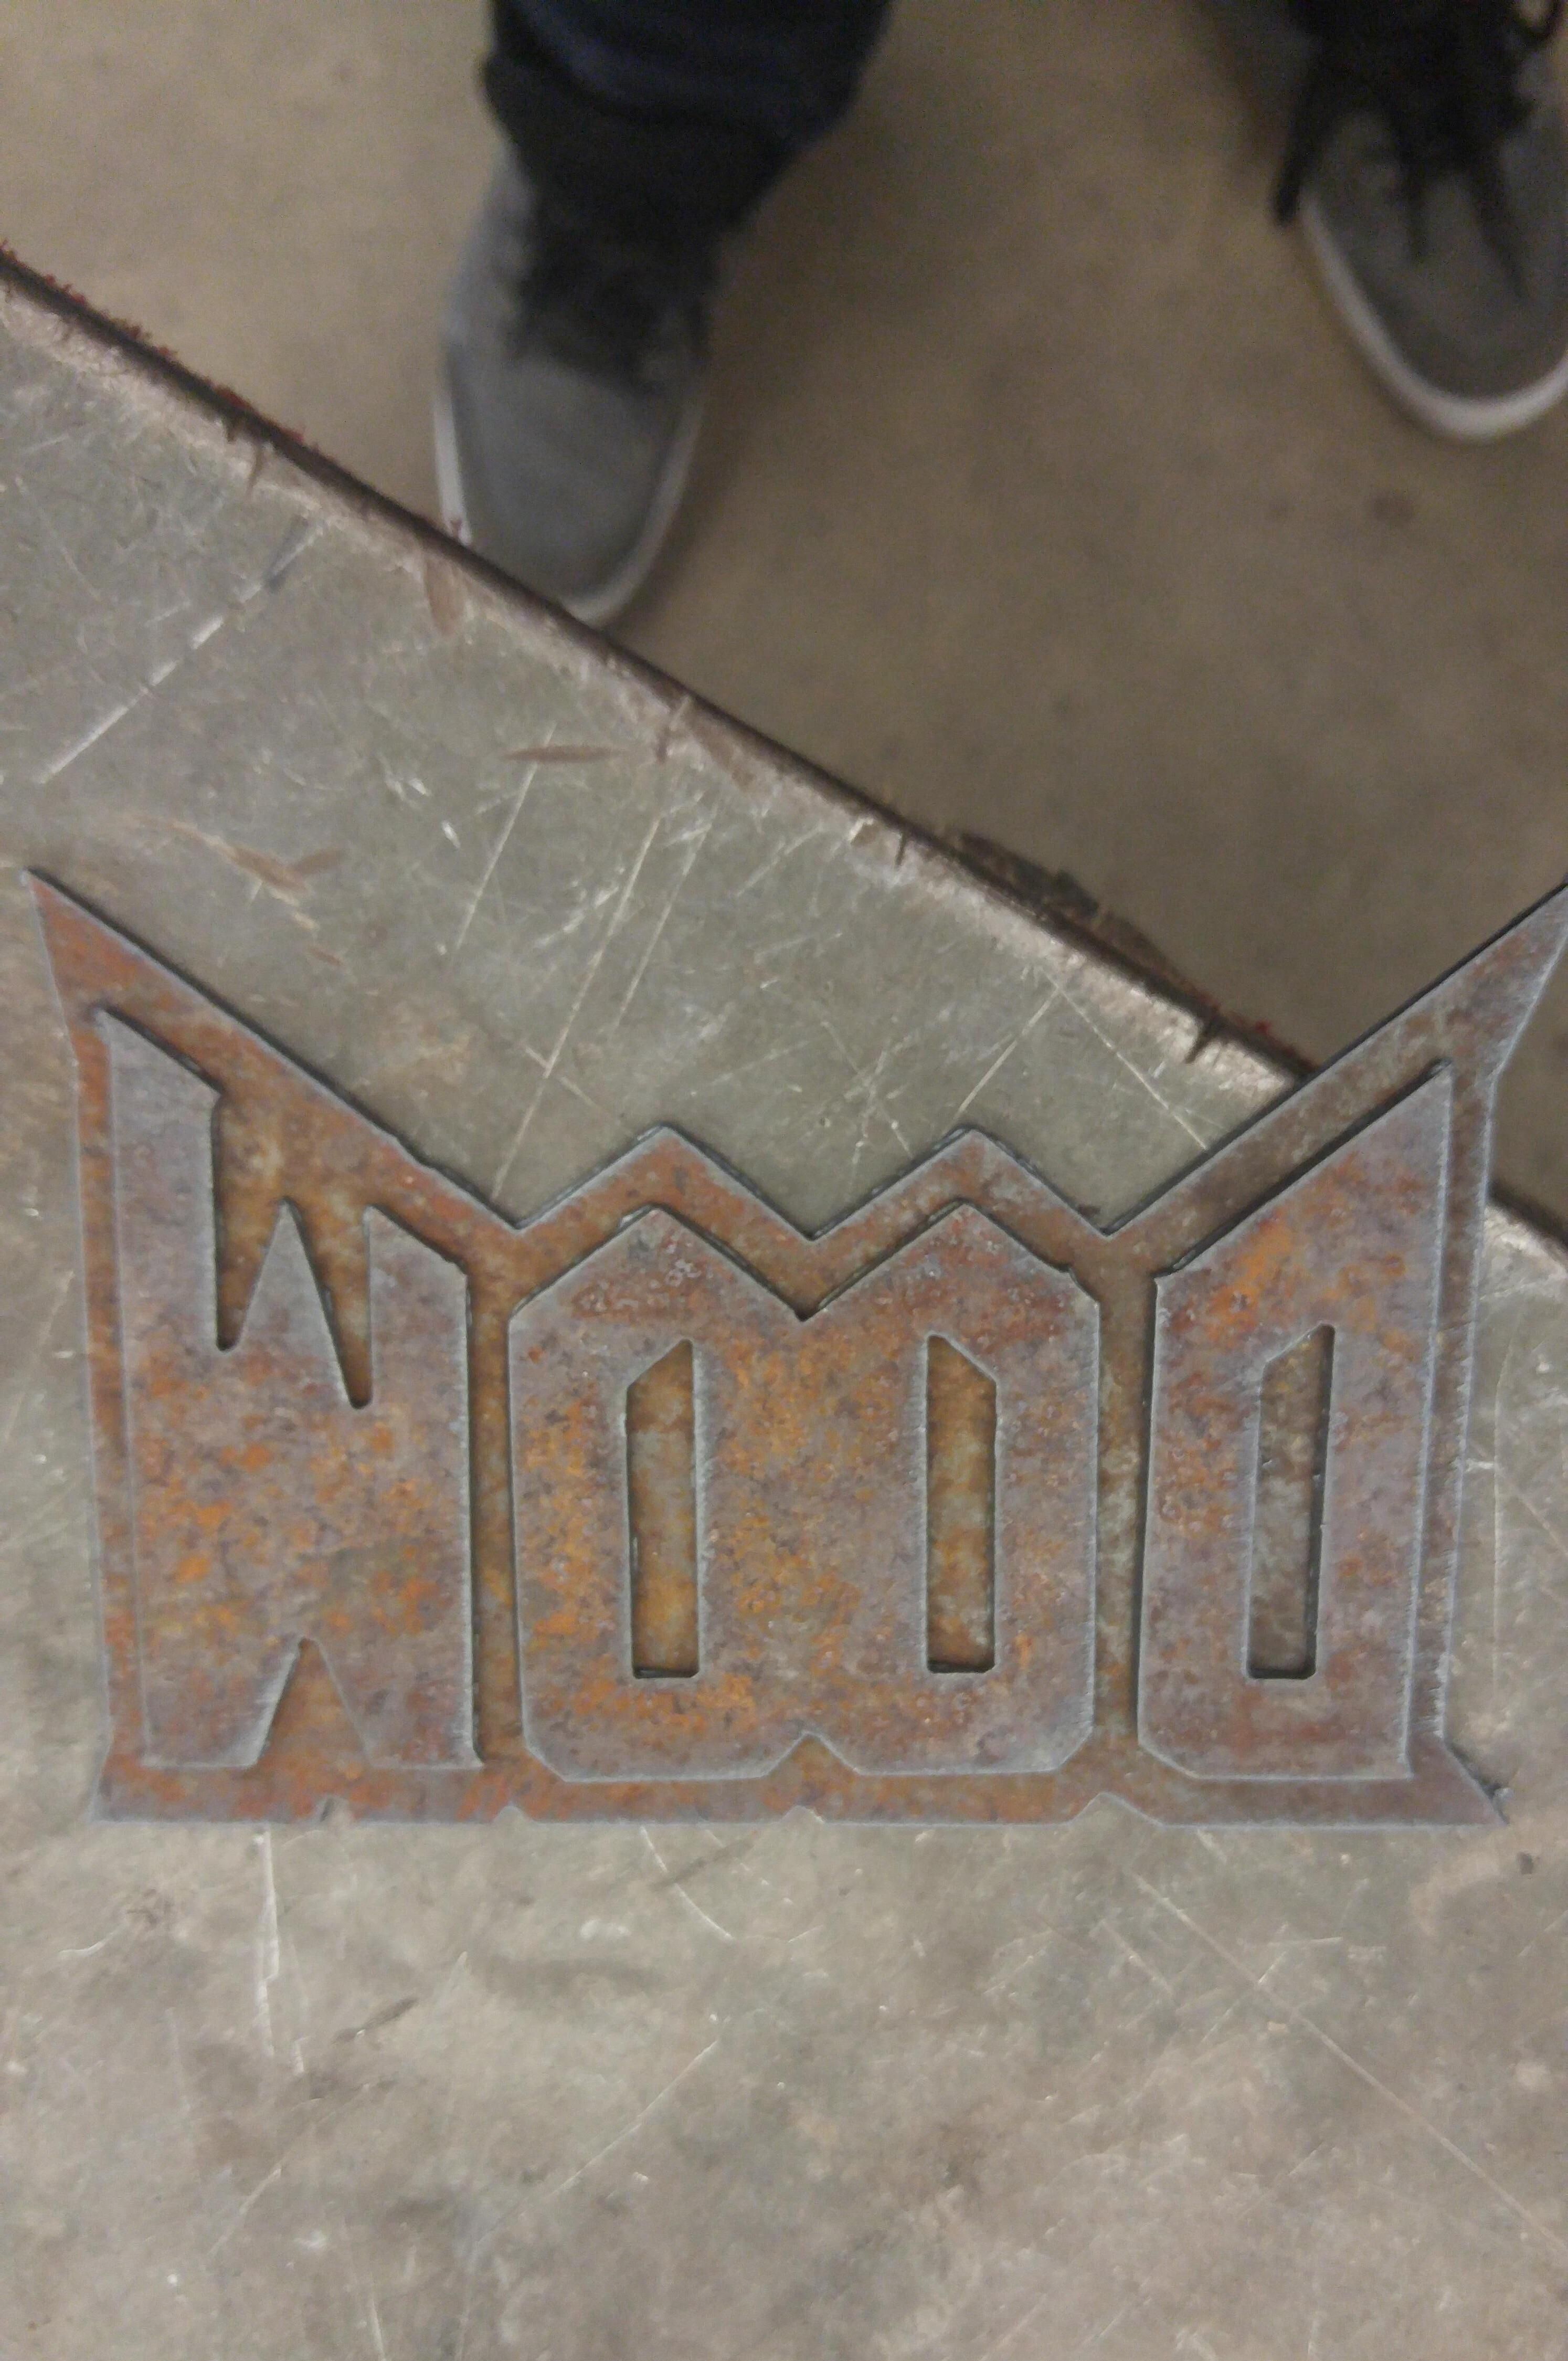 I made a Wood Logo in my woodshop class, what do you guys think? Its not done yet.